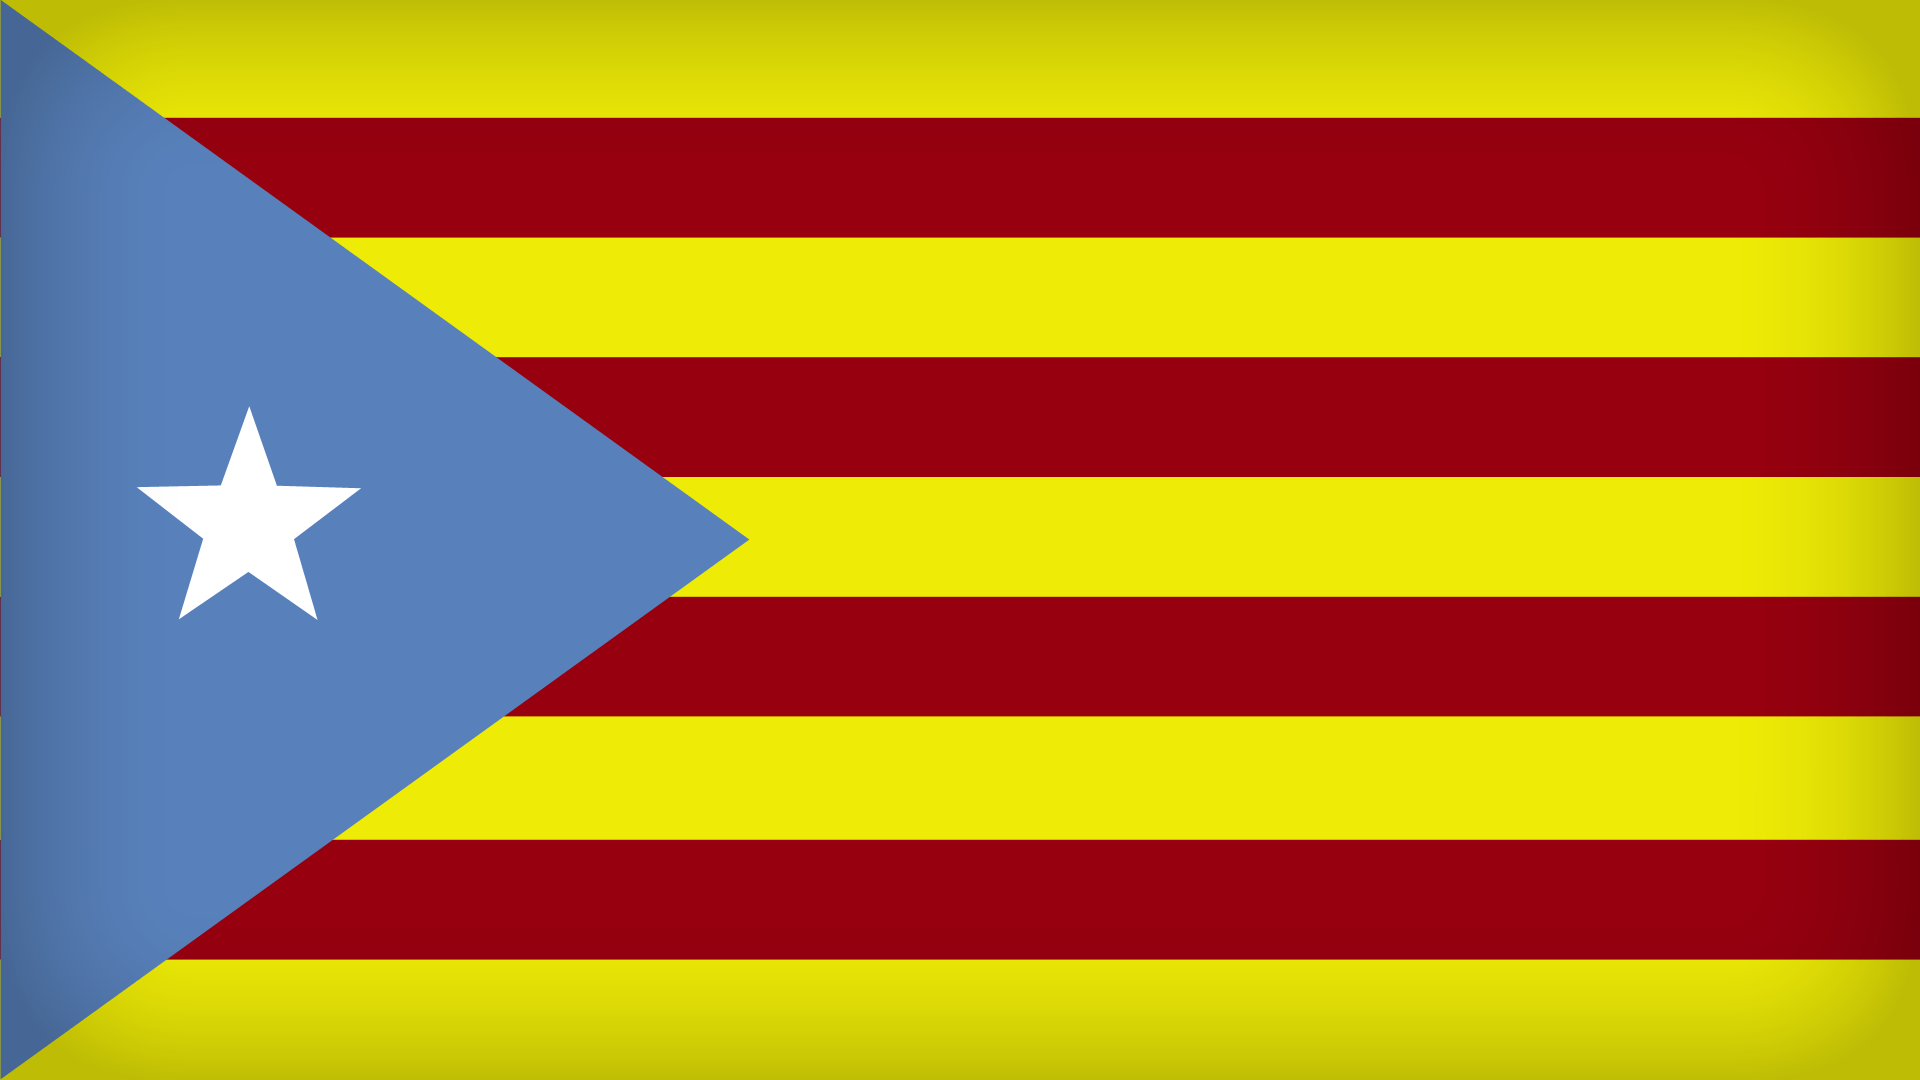 Catalonia.png (1920×1080)